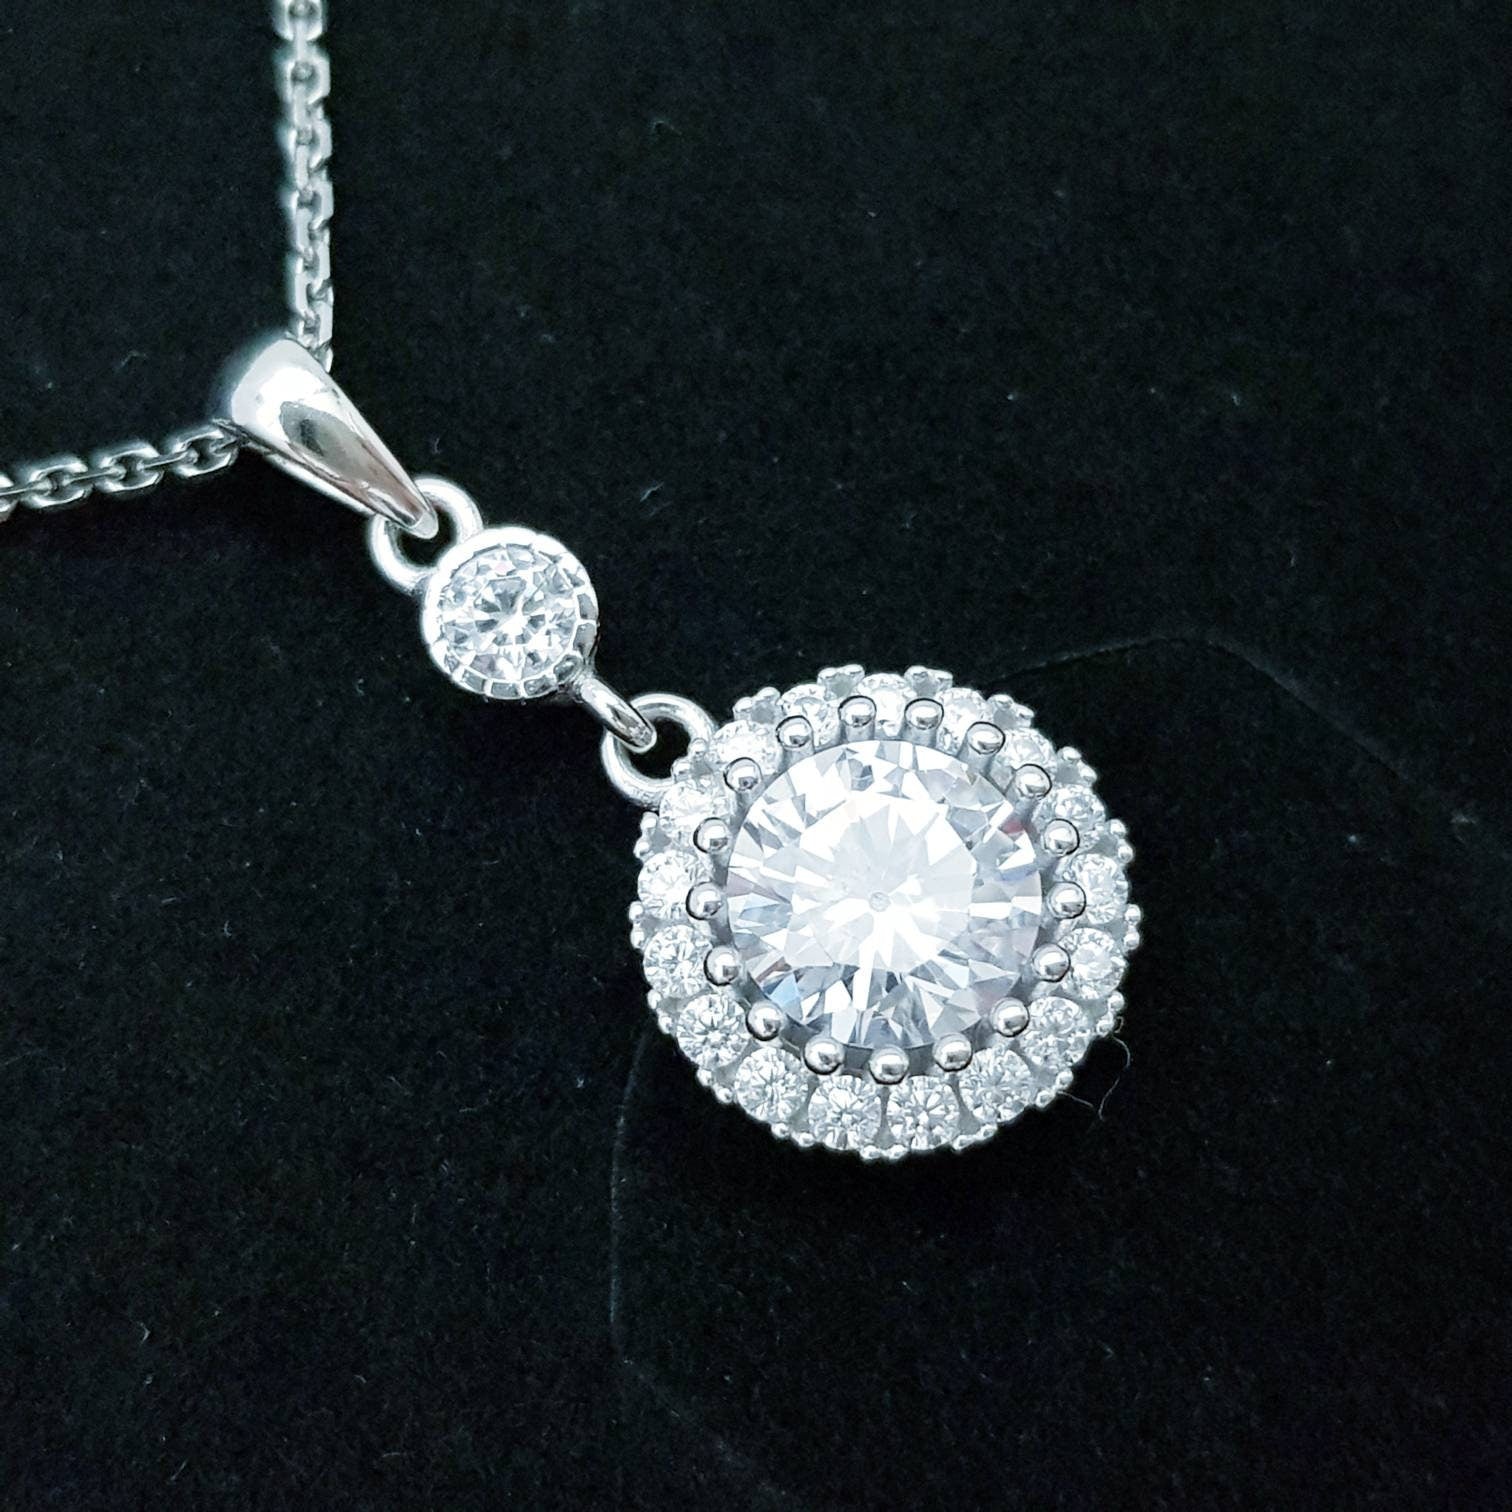 Vintage style round sterling silver necklace with sparkling white cubic zirconia